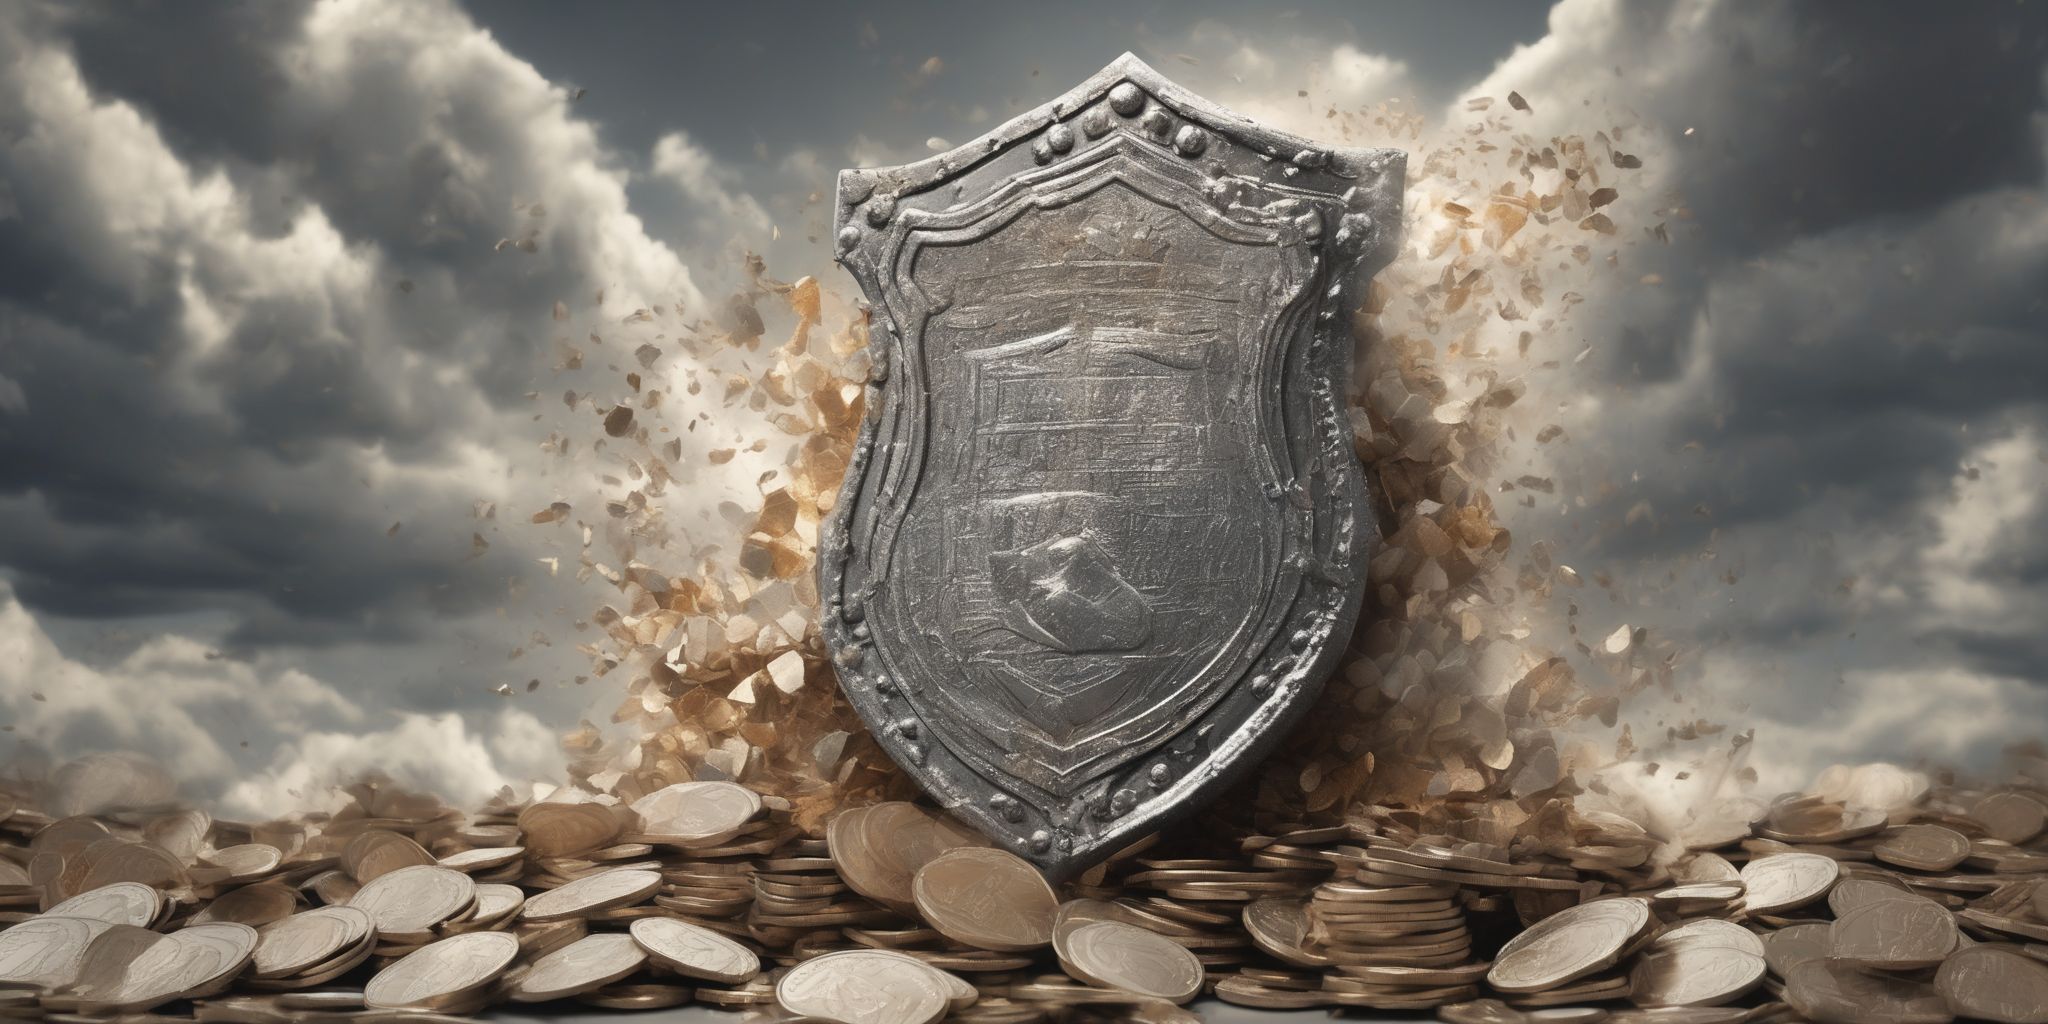 Debt shield  in realistic, photographic style